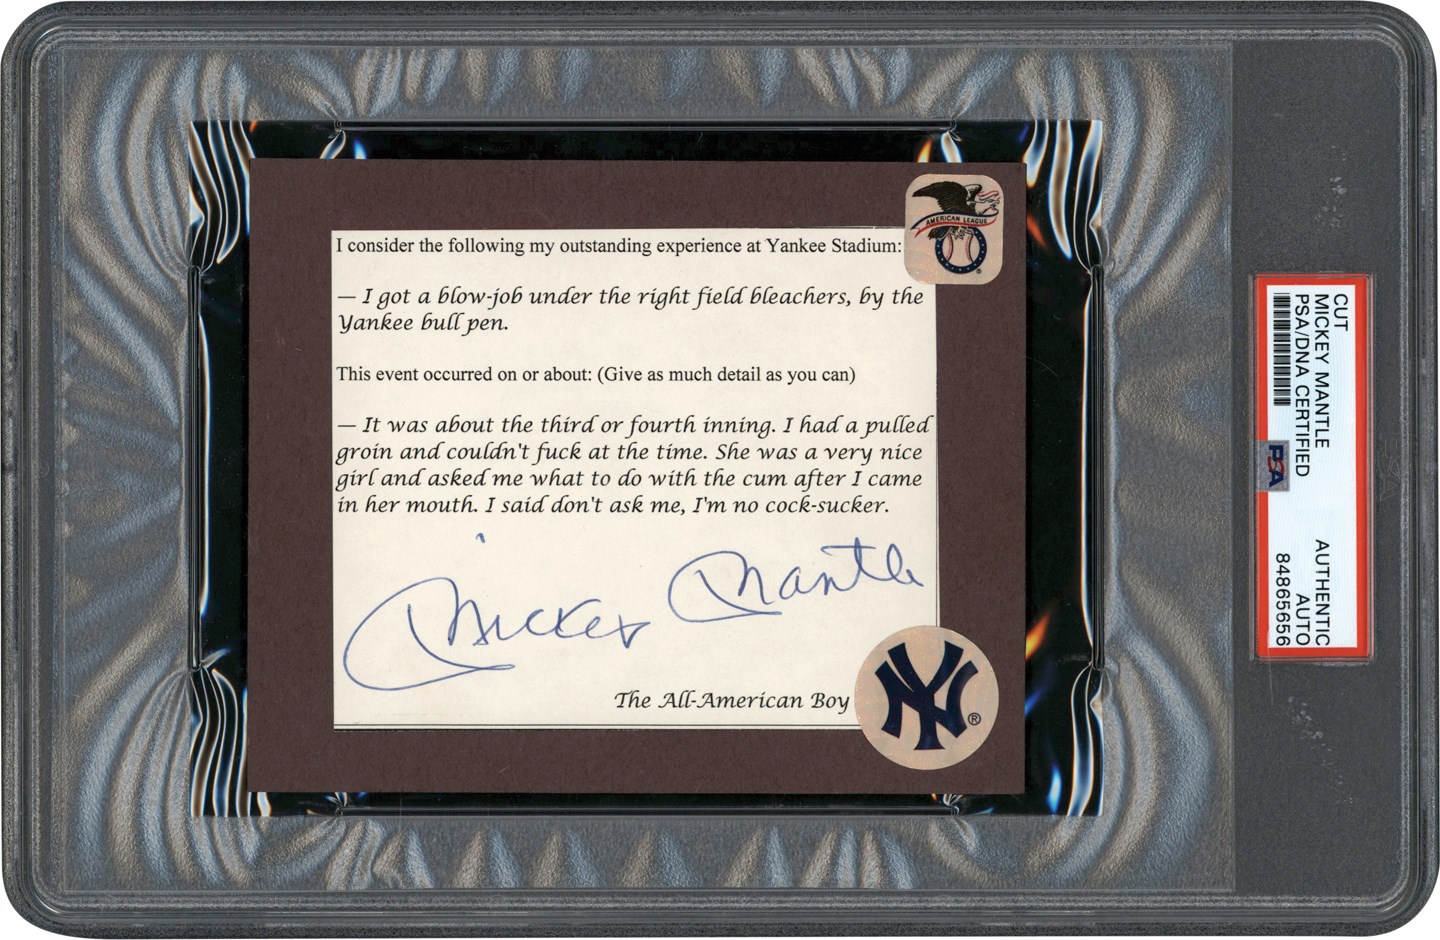 Mantle and Maris - Mickey Mantle X-Rated Autograph Referencing Infamous Yankee Questionnaire (PSA & JSA)